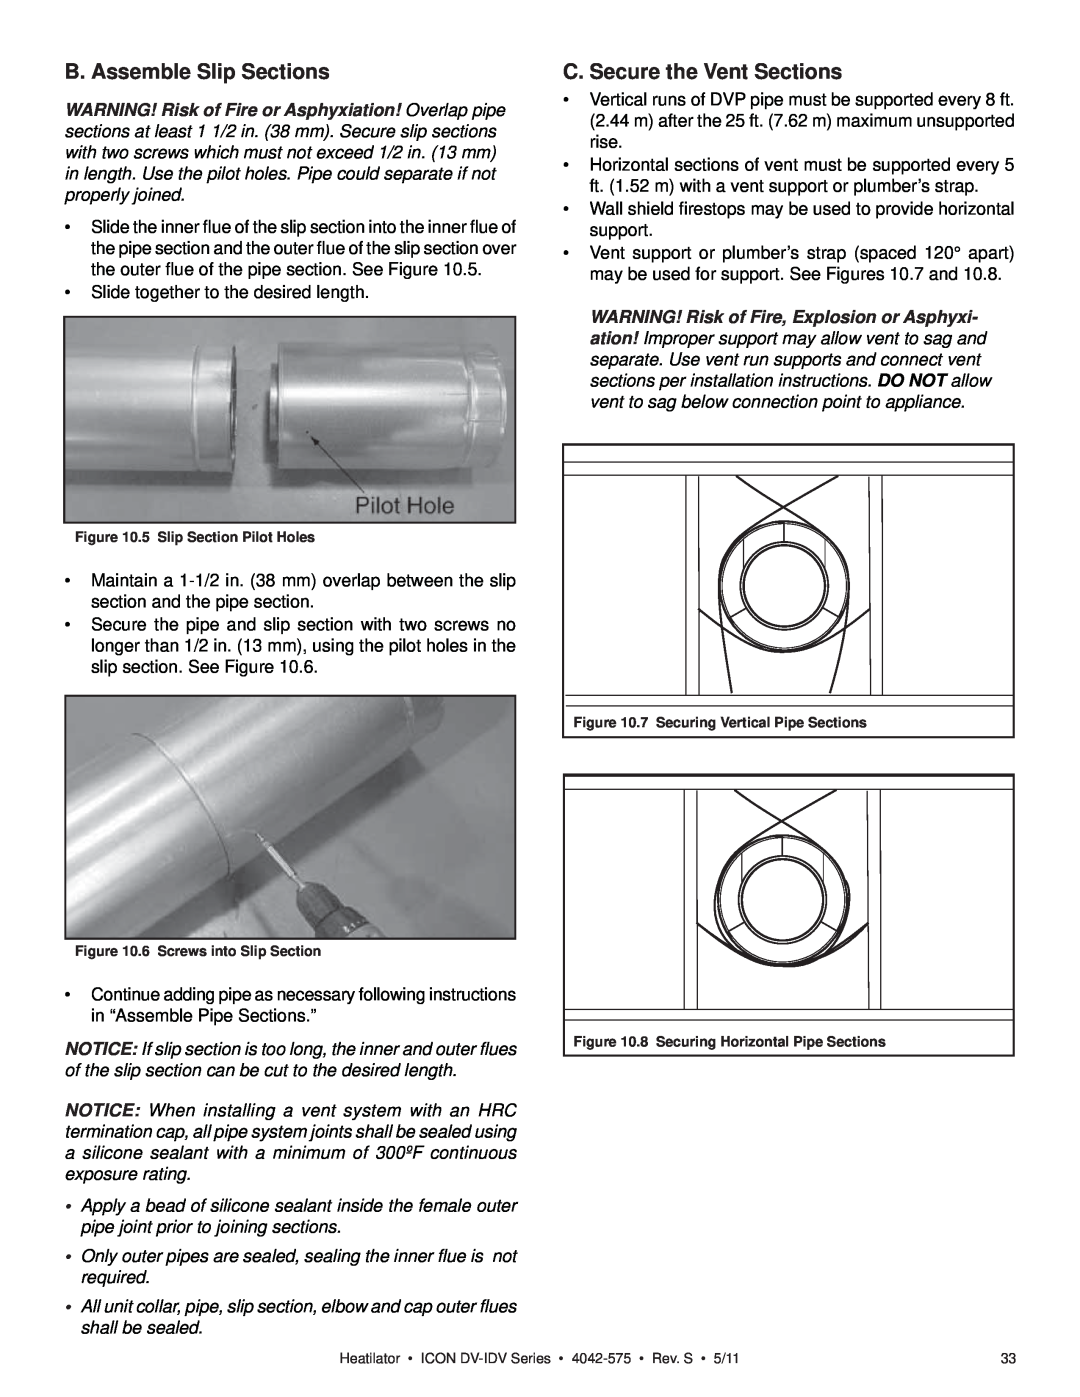 Heatiator IDV4833IT owner manual B. Assemble Slip Sections, C. Secure the Vent Sections 